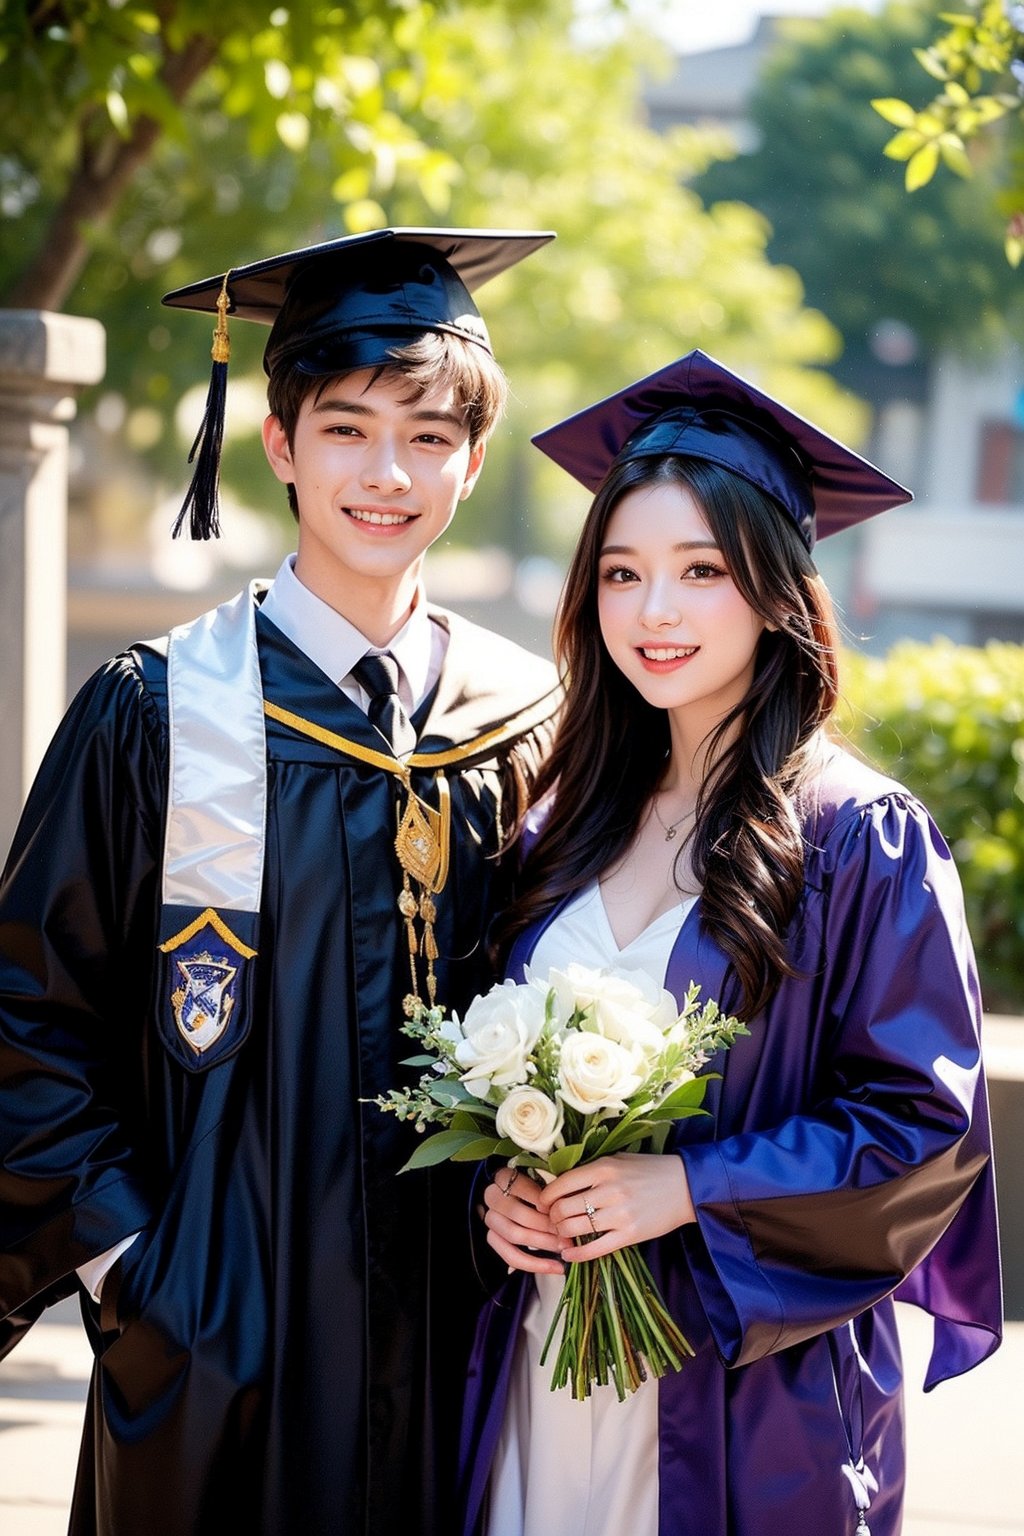 This image is a high-resolution photo that may have been taken by a professional or experienced photographer. A girl and a boy wearing black graduation gowns and caps outdoors. They smiled, waved, and happily took photos together holding a bouquet of purple and white flowers. Cue an outdoor graduation ceremony scene. With a blurred background of leafy trees and blurred buildings, as well as other people in graduation gowns, the image is bright and clear, with natural light emphasizing the celebratory atmosphere. The subject appears relaxed and happy, marking an important milestone.